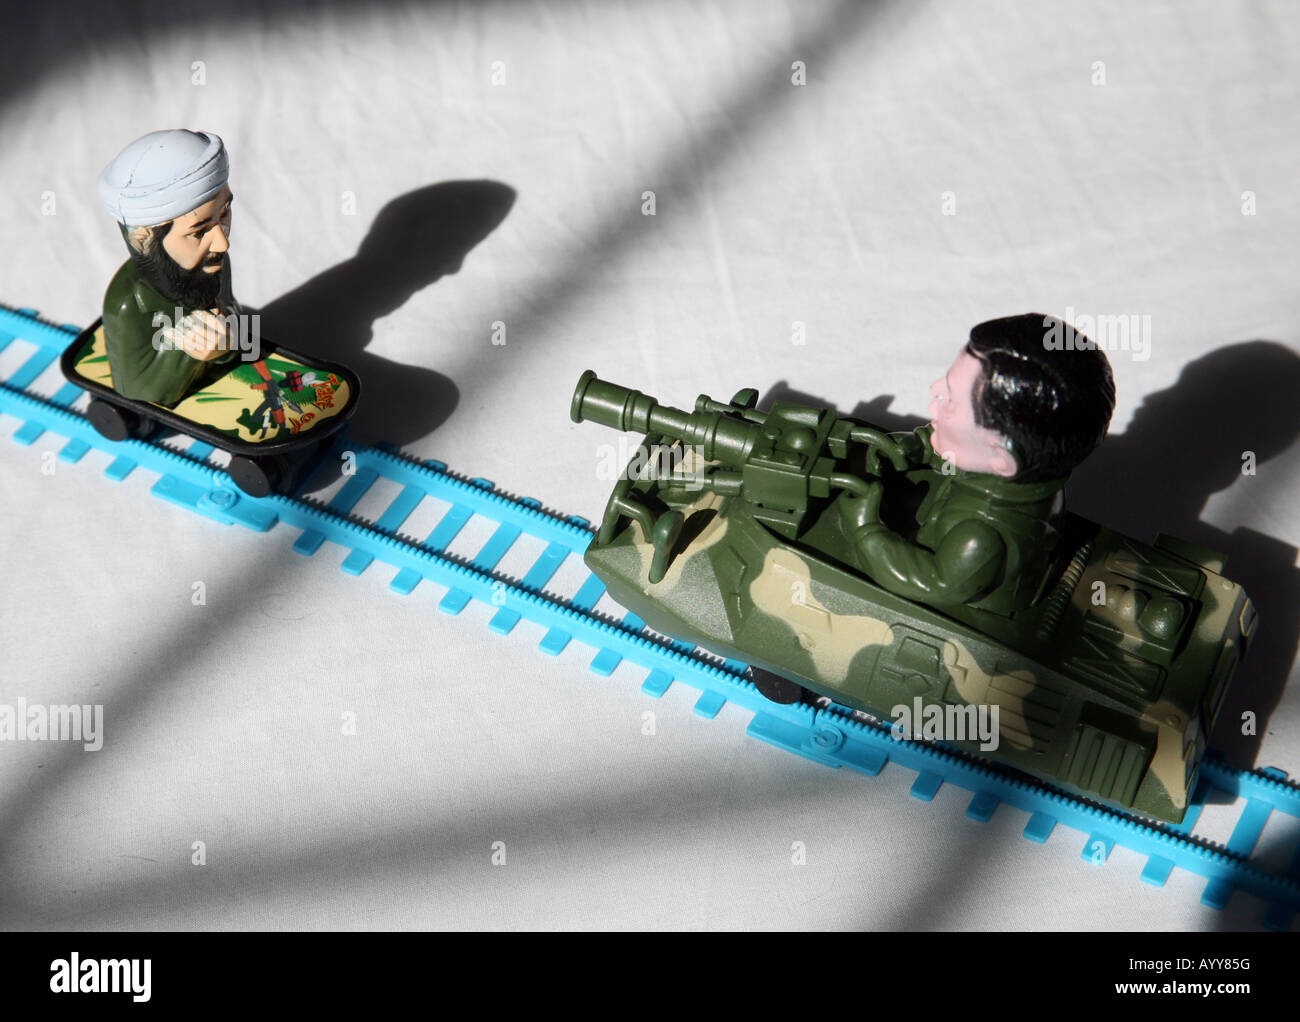 Osama Bin Laden and George Bush figures in a children's game Stock Photo